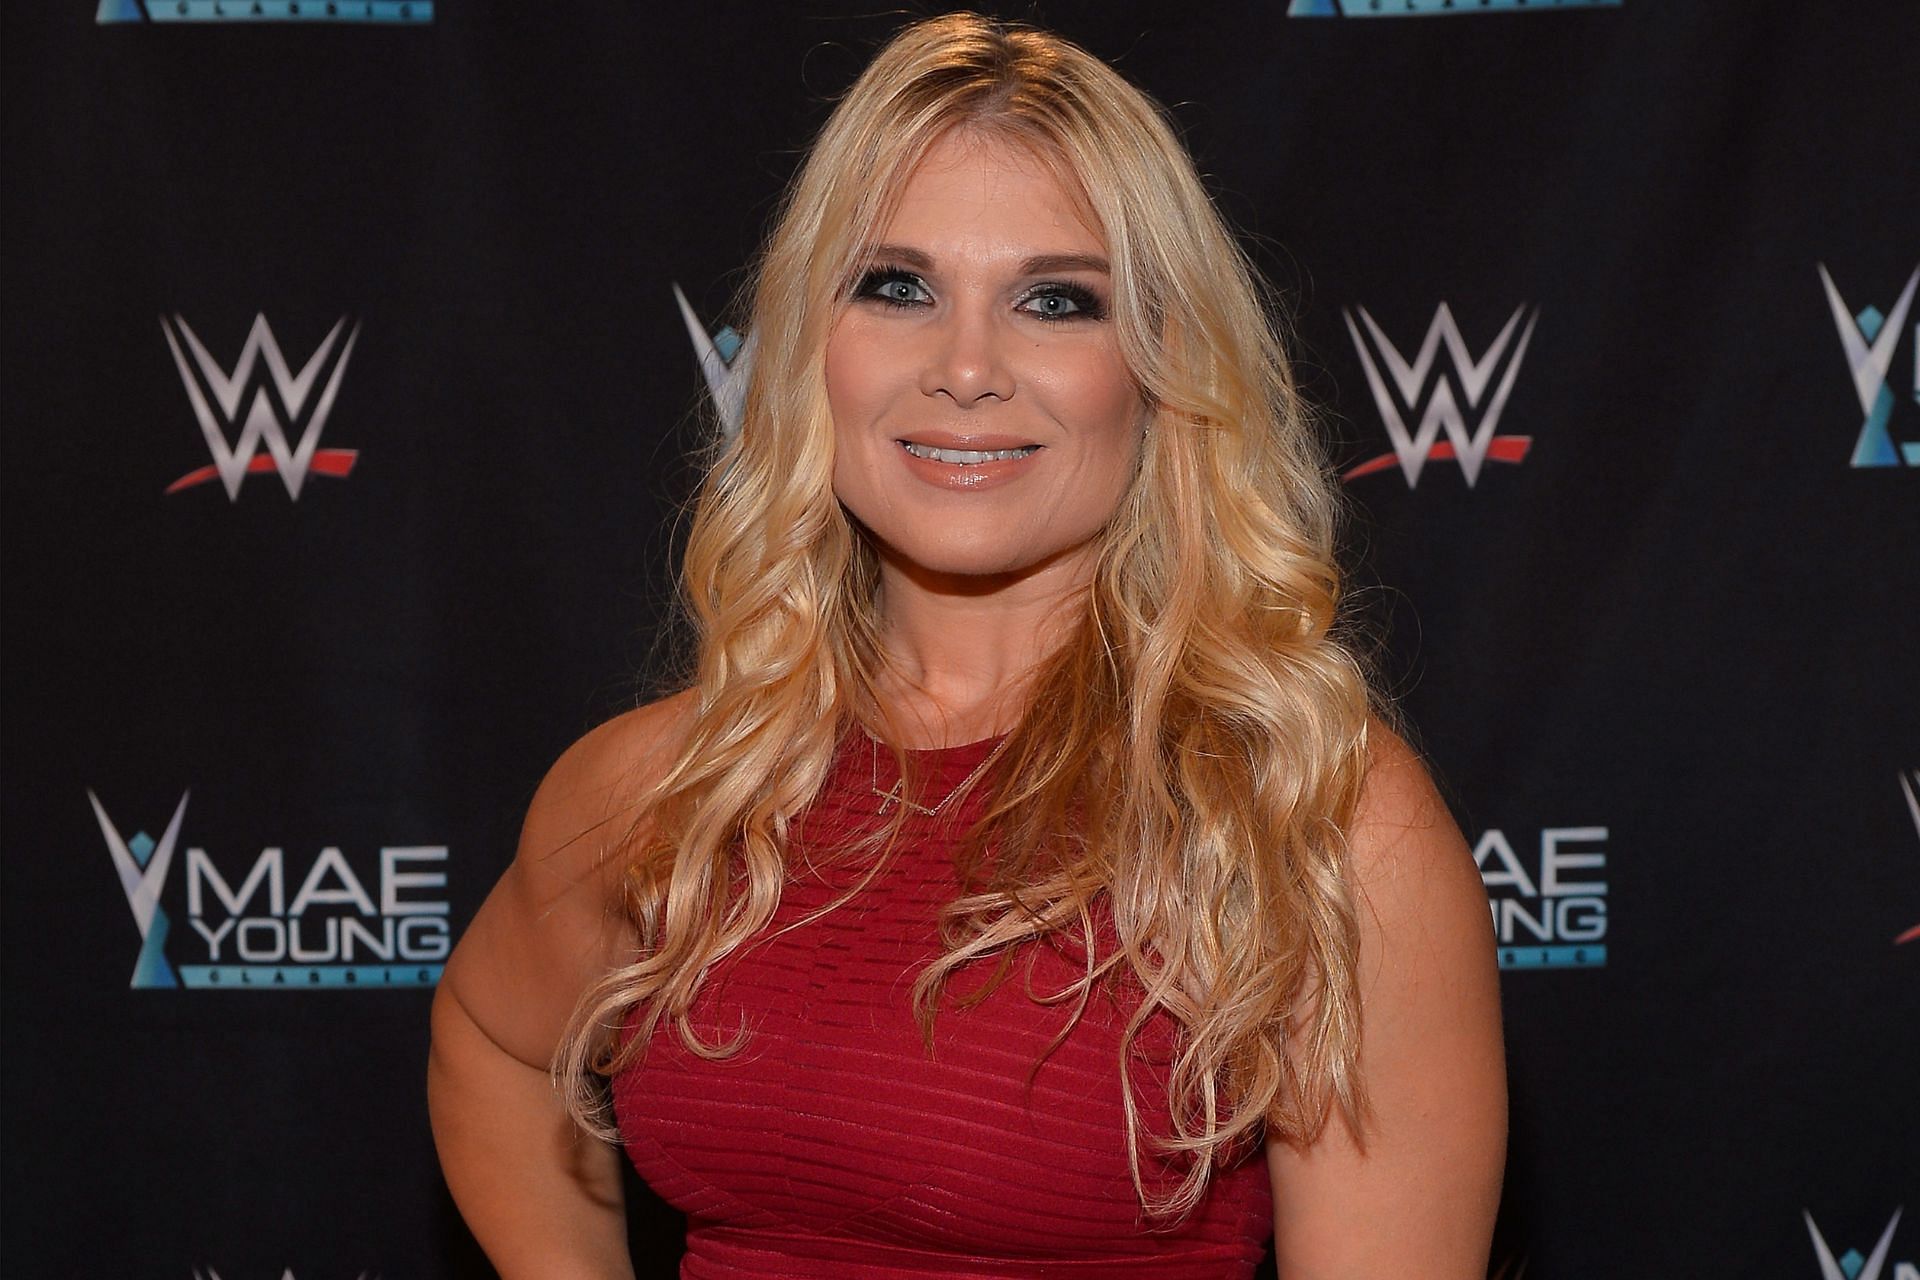 A female wrestler has her sights on a match with Beth Phoenix